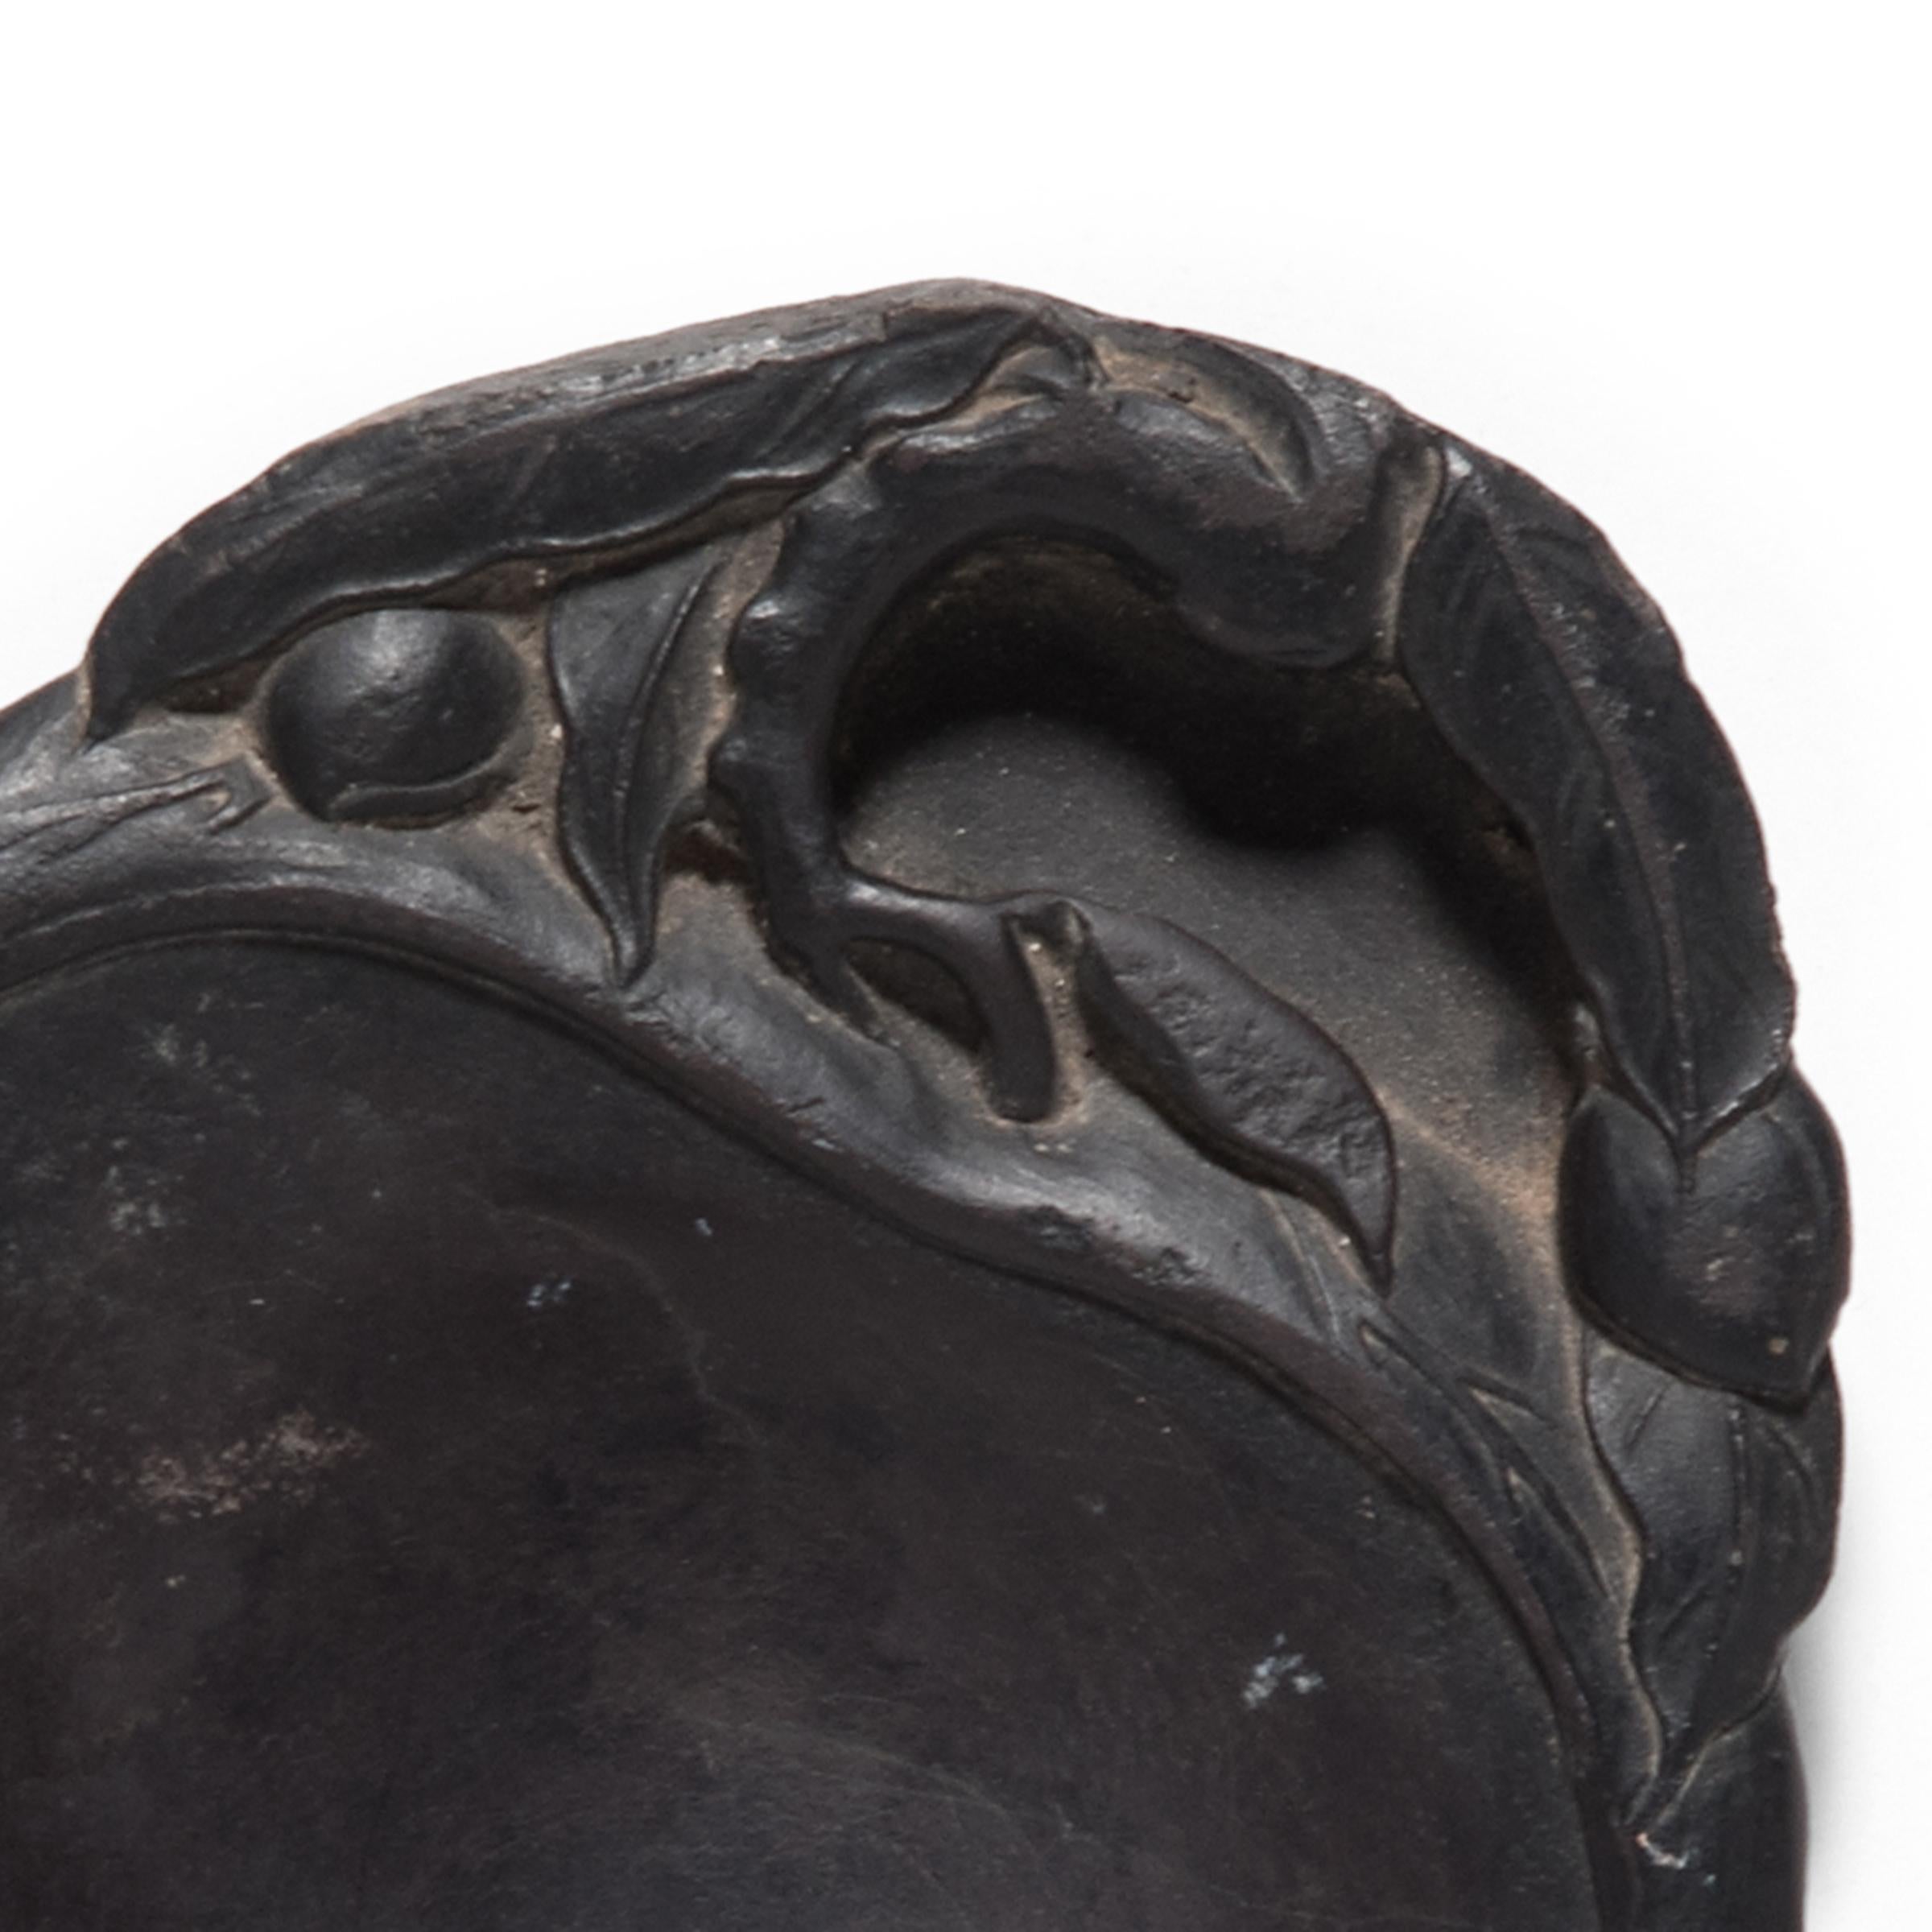 Hand-Carved Chinese Peach Form Inkstone, c. 1850